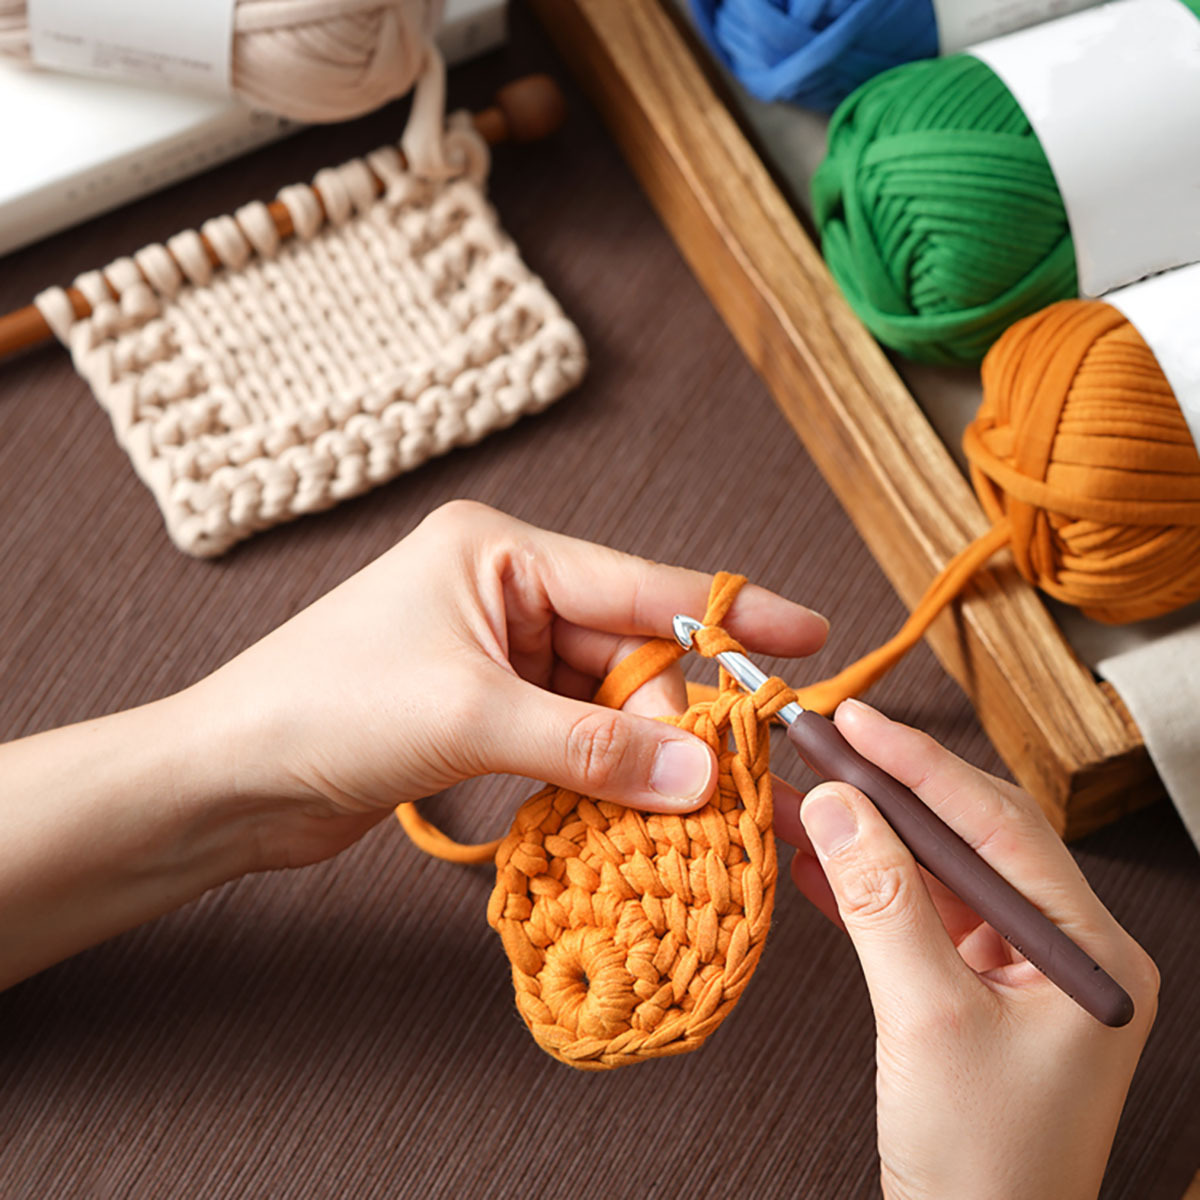 Best Yarn for Knitting, Weaving, and Crocheting